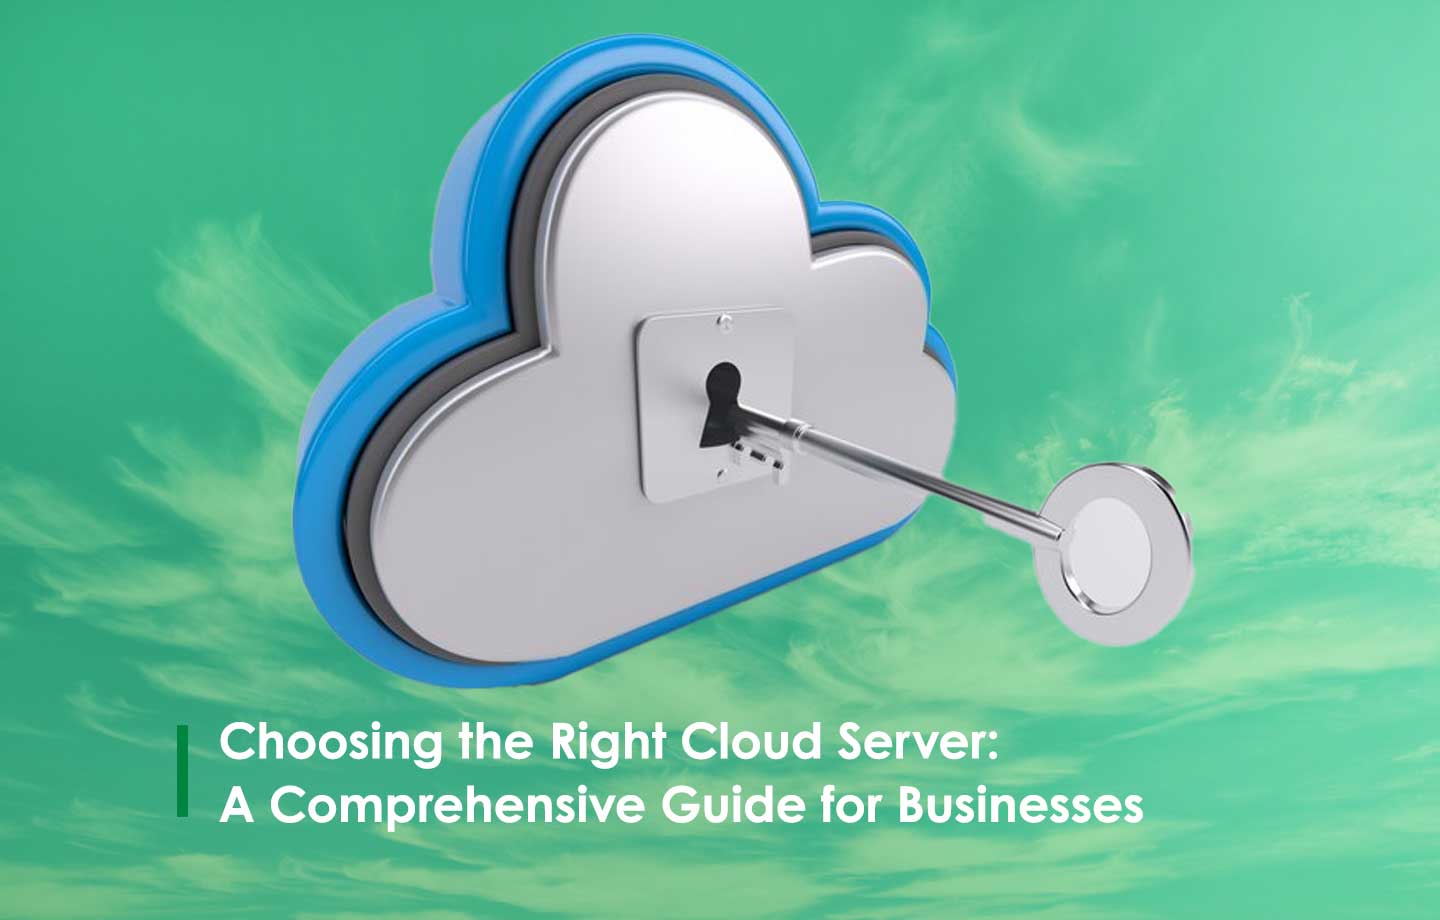 Choosing the Right Cloud Server: A Comprehensive Guide for Businesses